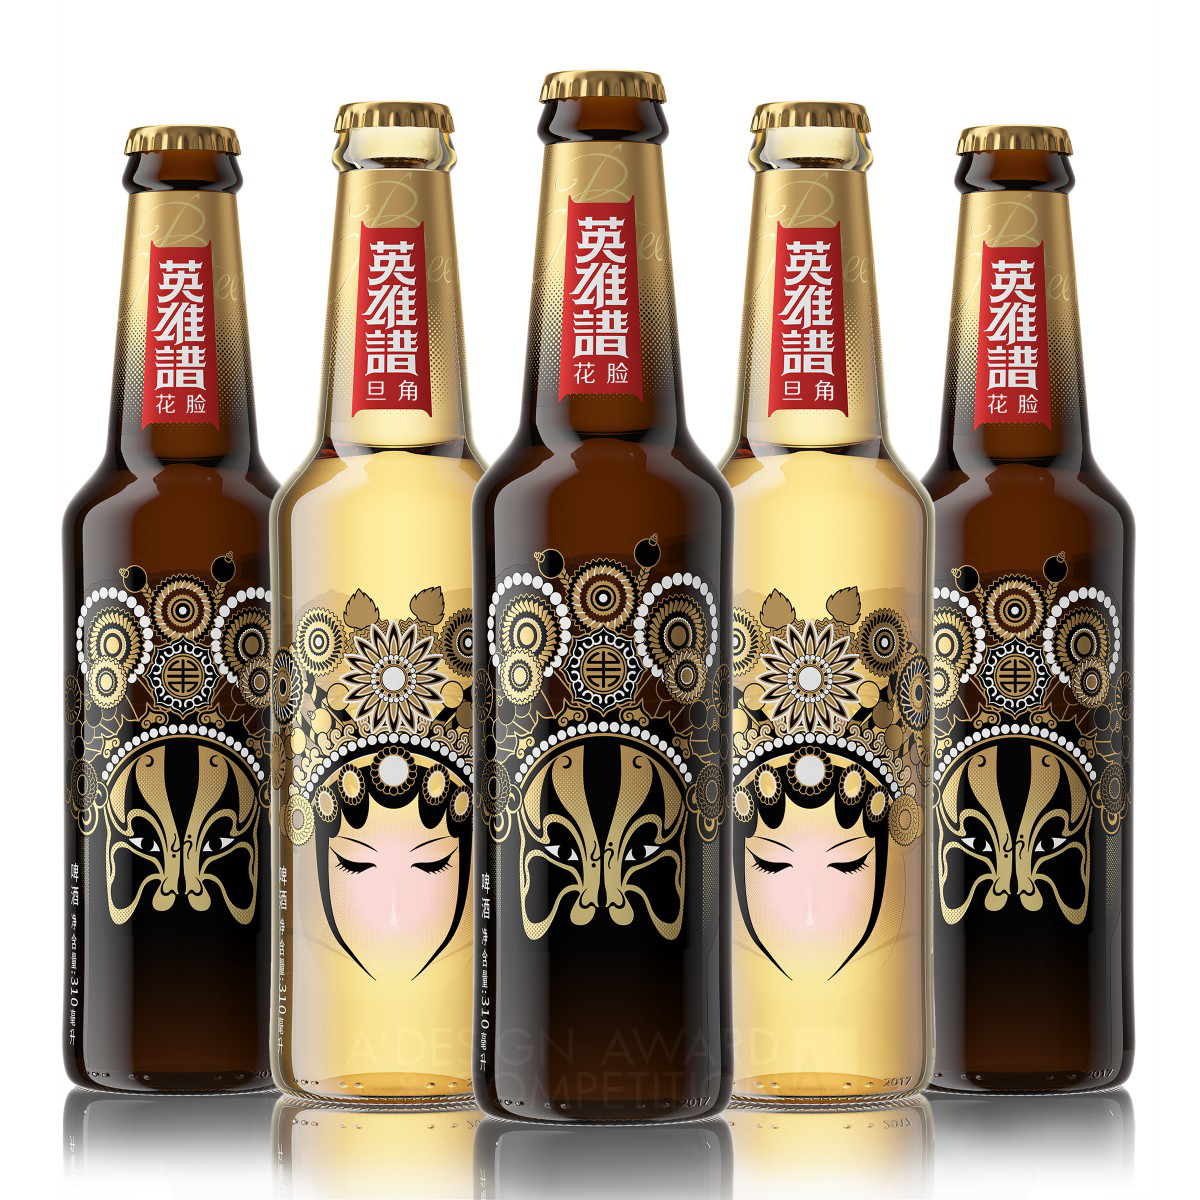 Snow Breweries-Ying Xiong Pu <b>Beer